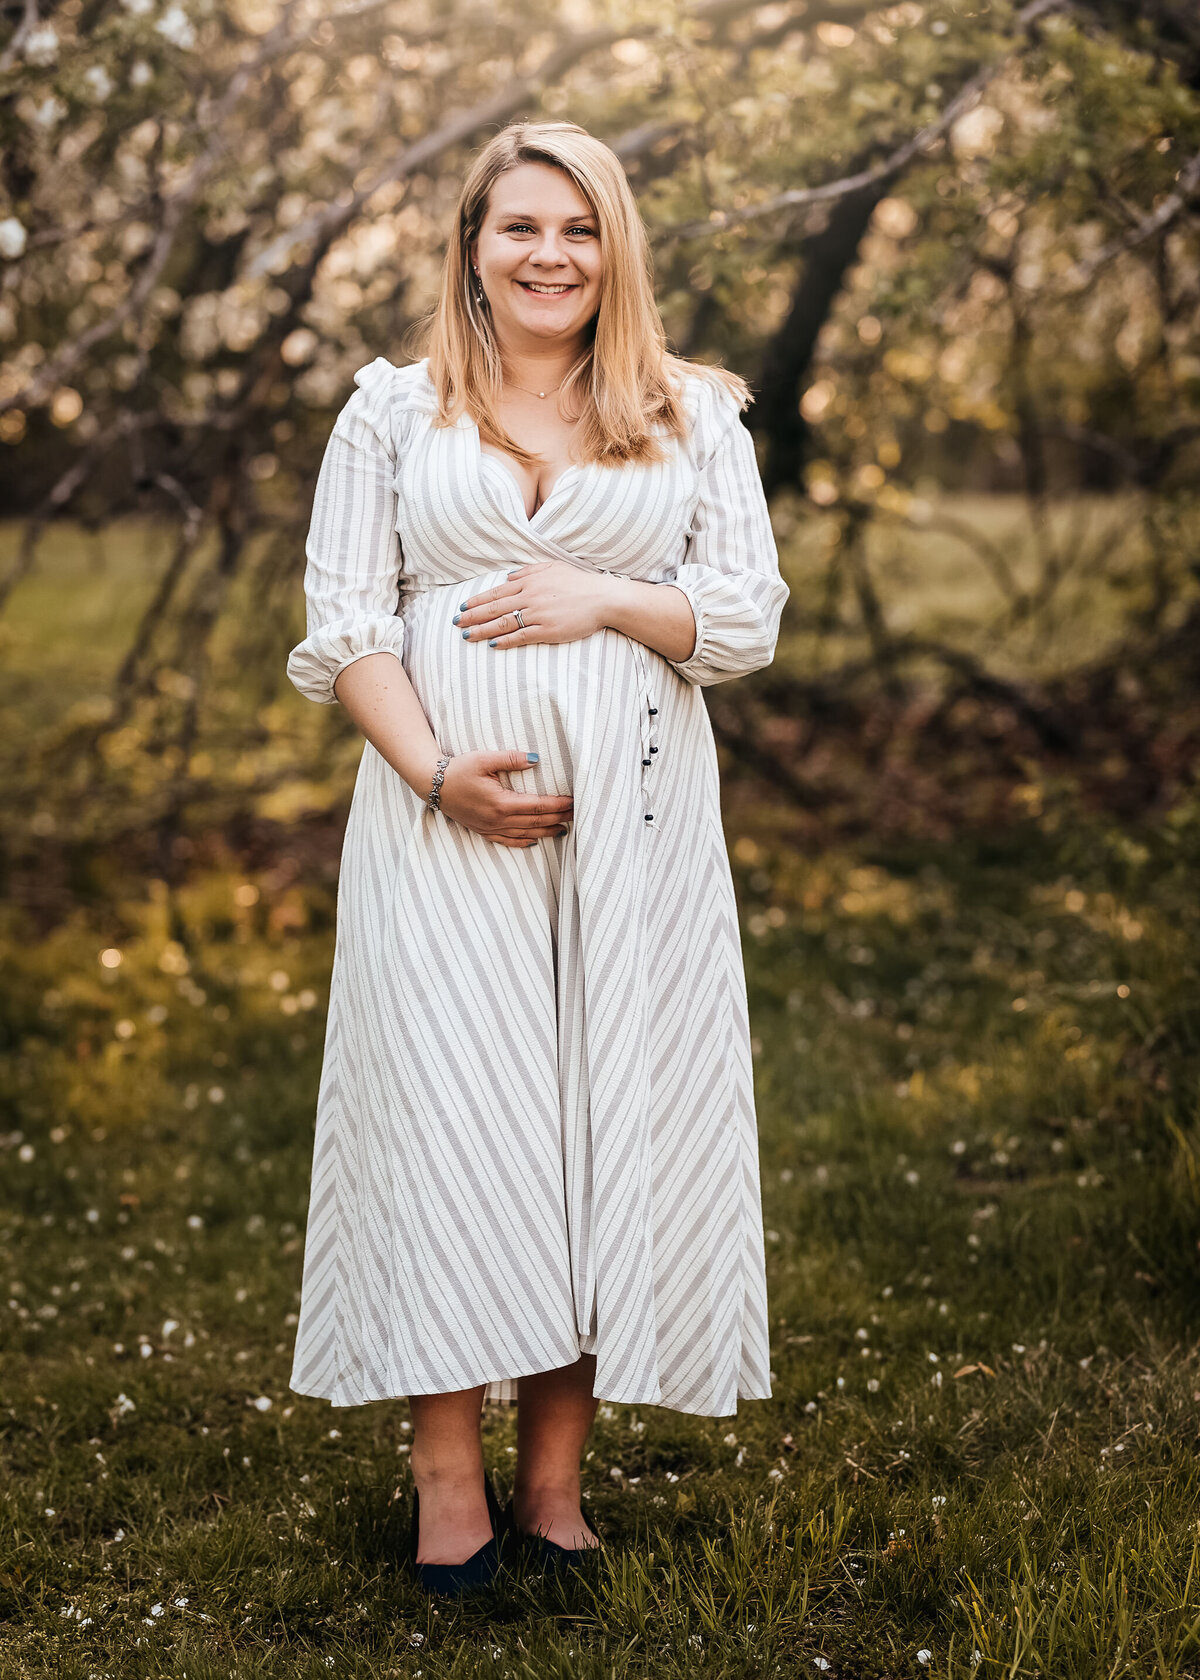 Pregnant mother cradling stomach in maternity portrait by Lisa Smith Photography